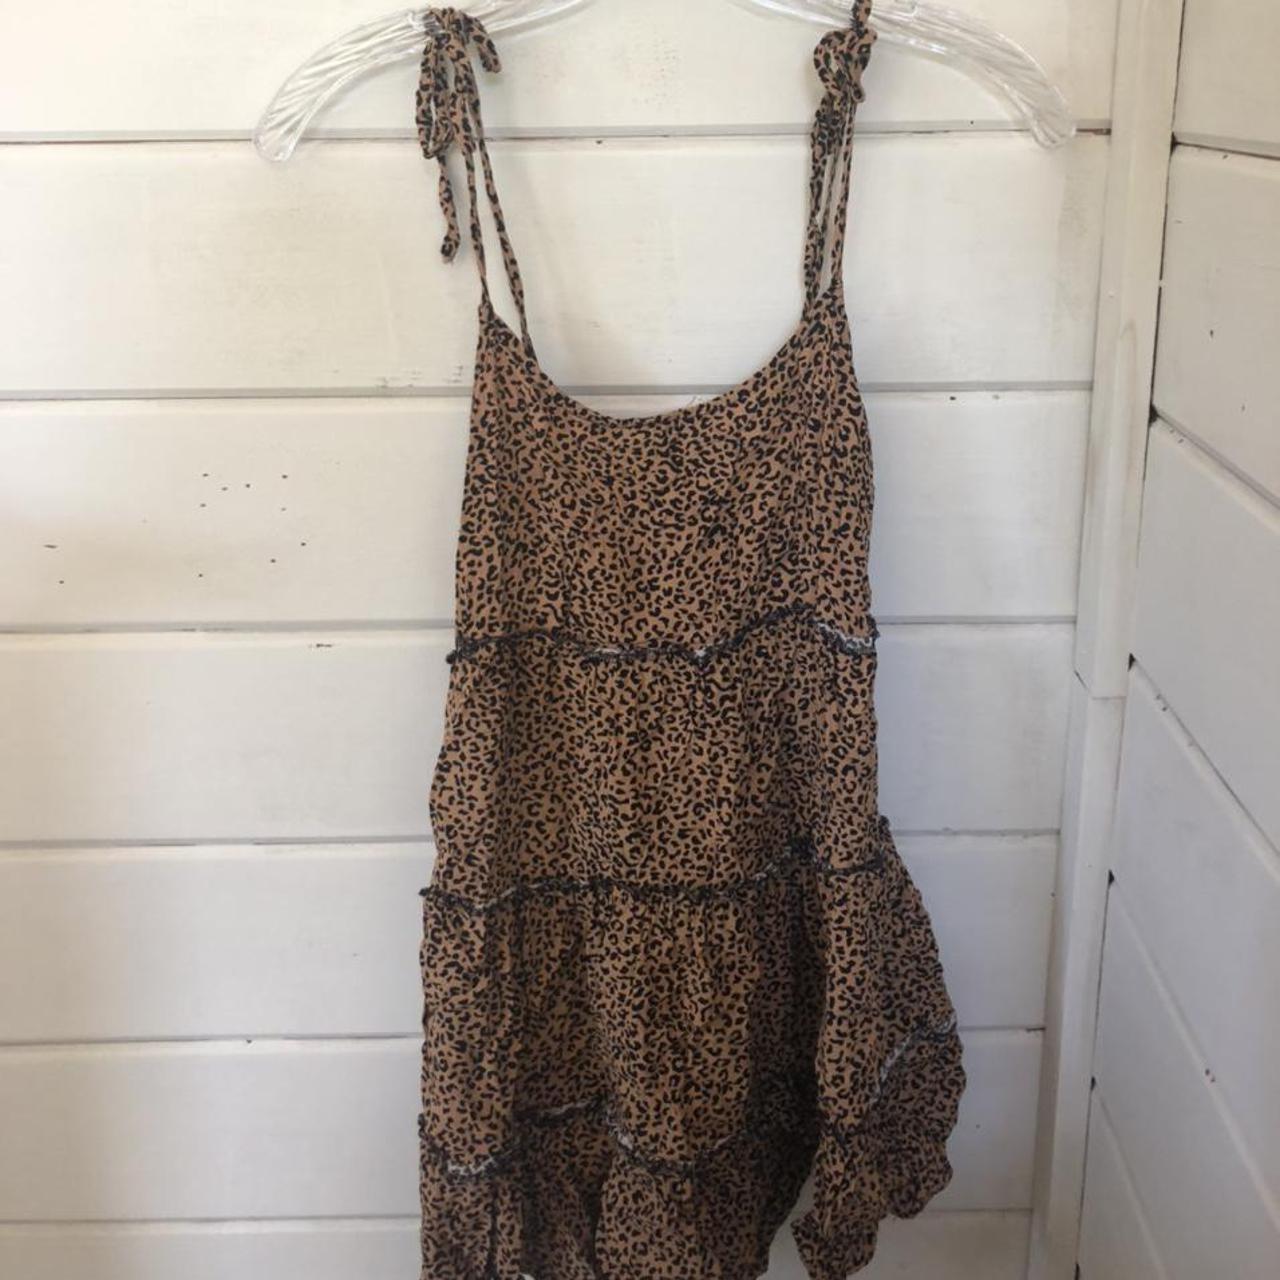 Product Image 1 - Leopard print ruffle sundress with